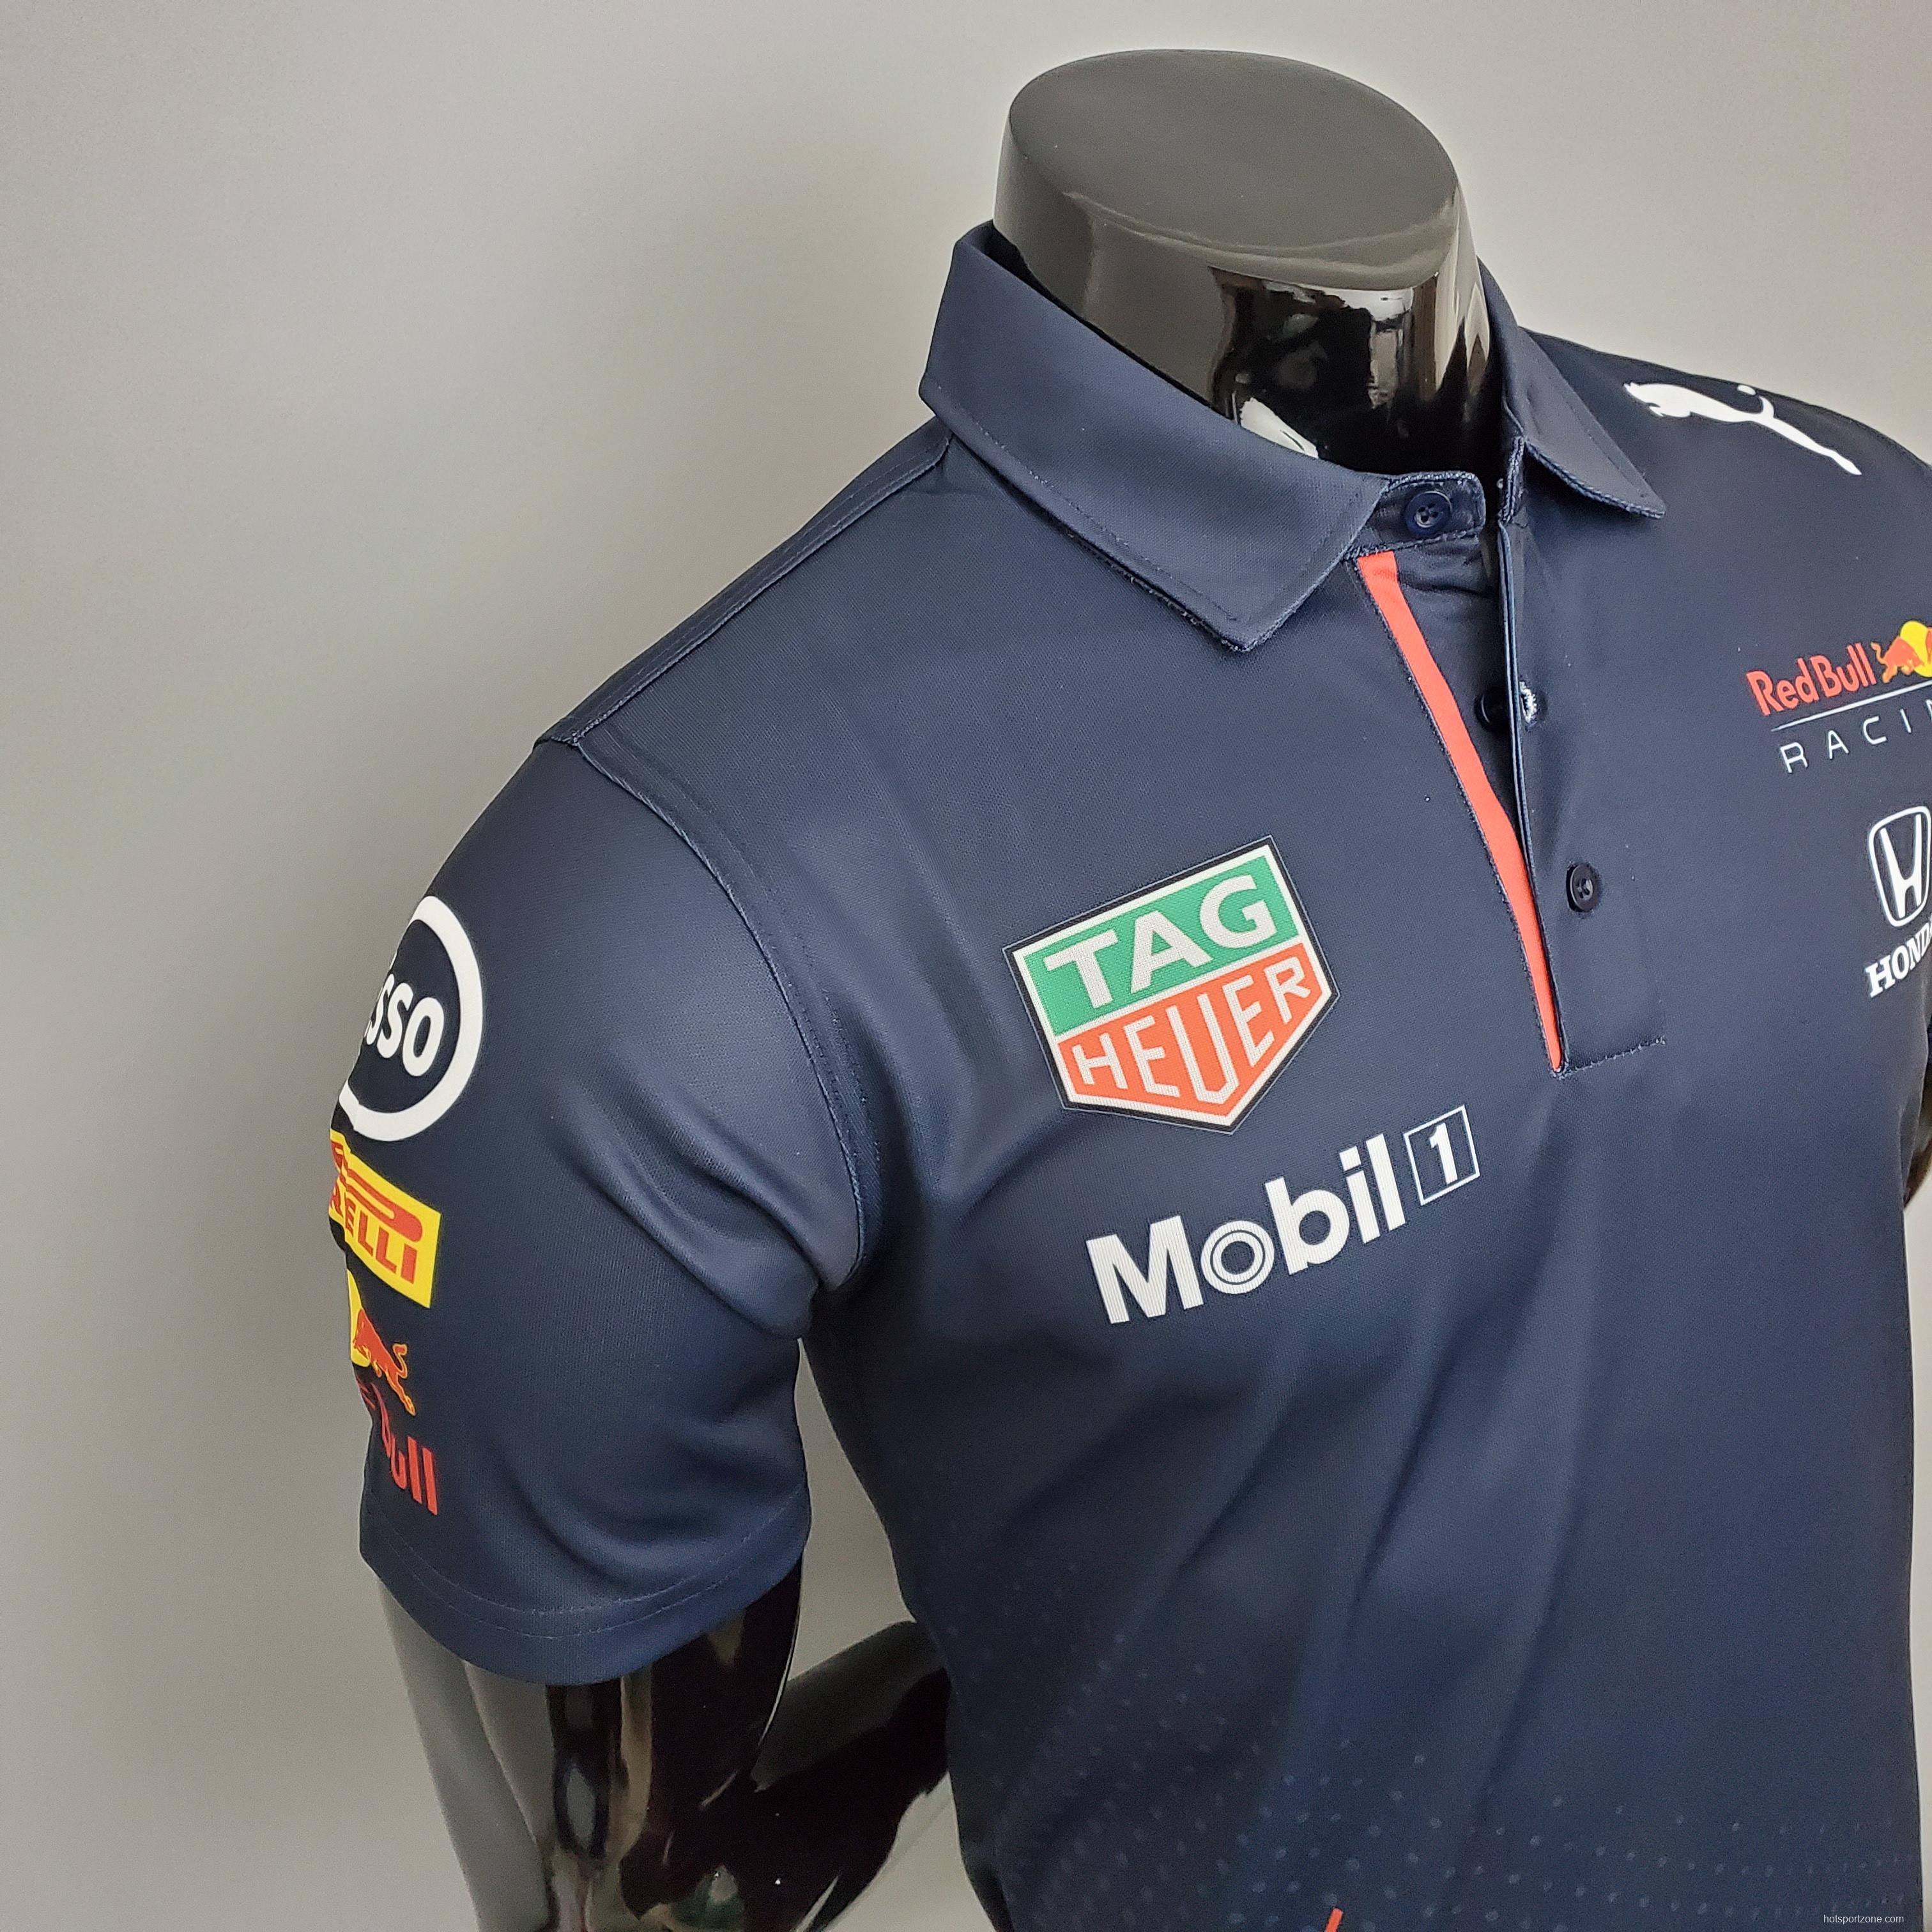 F1 Formula One racing suit; Honda Red Bull racing suit POLO Sapphire S-5XL